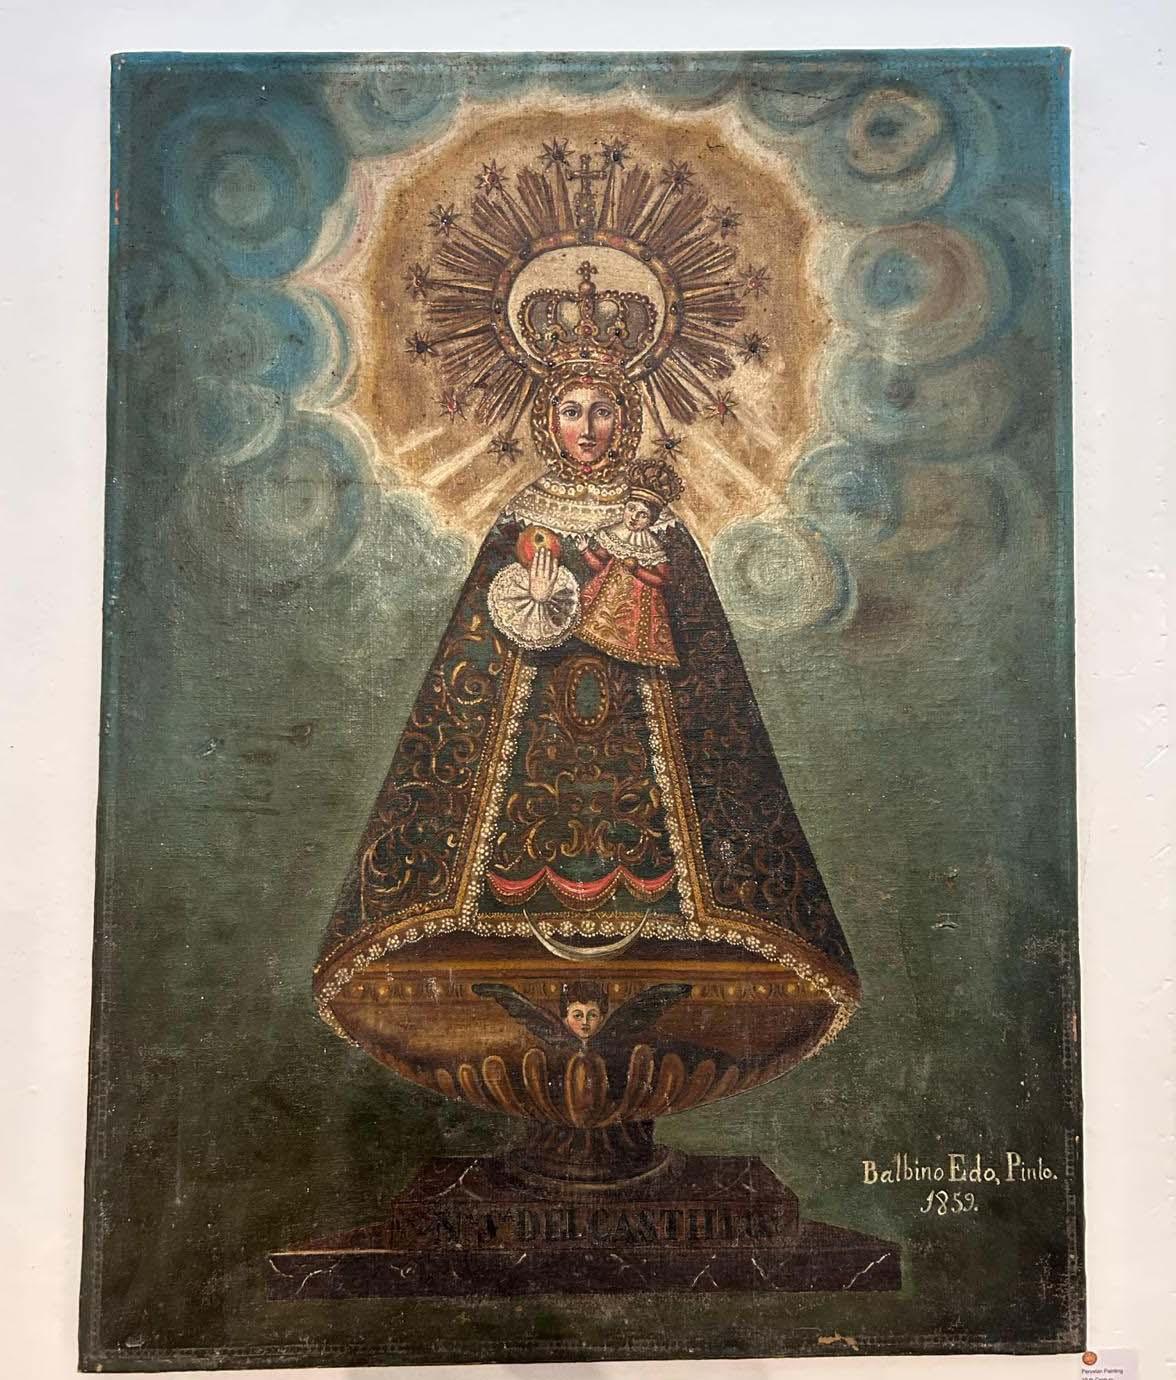 A fine 19th painting of the Virgin del Castillo's 
South American Peru or Bolivia school 19th century  
Signed Balbino Edo, Pinto 1859
Oil on canvas, 72 by 98cms.  36 x 27 inches
Condition Old Canvas unrestored uncleaned minor damage and